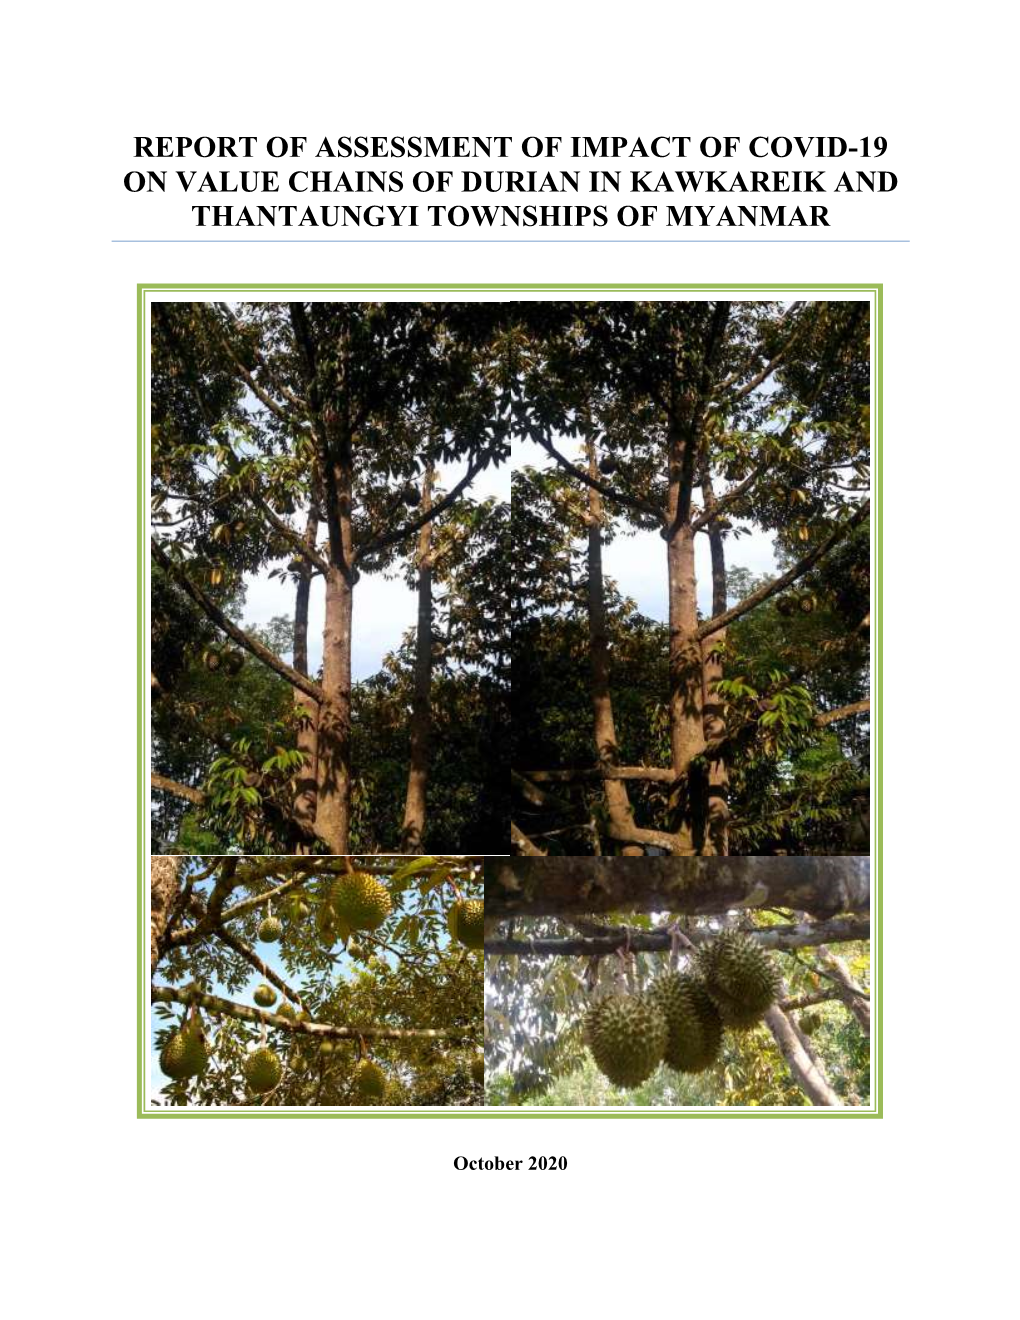 Report of Assessment of Impact of Covid-19 on Value Chains of Durian in Kawkareik and Thantaungyi Townships of Myanmar